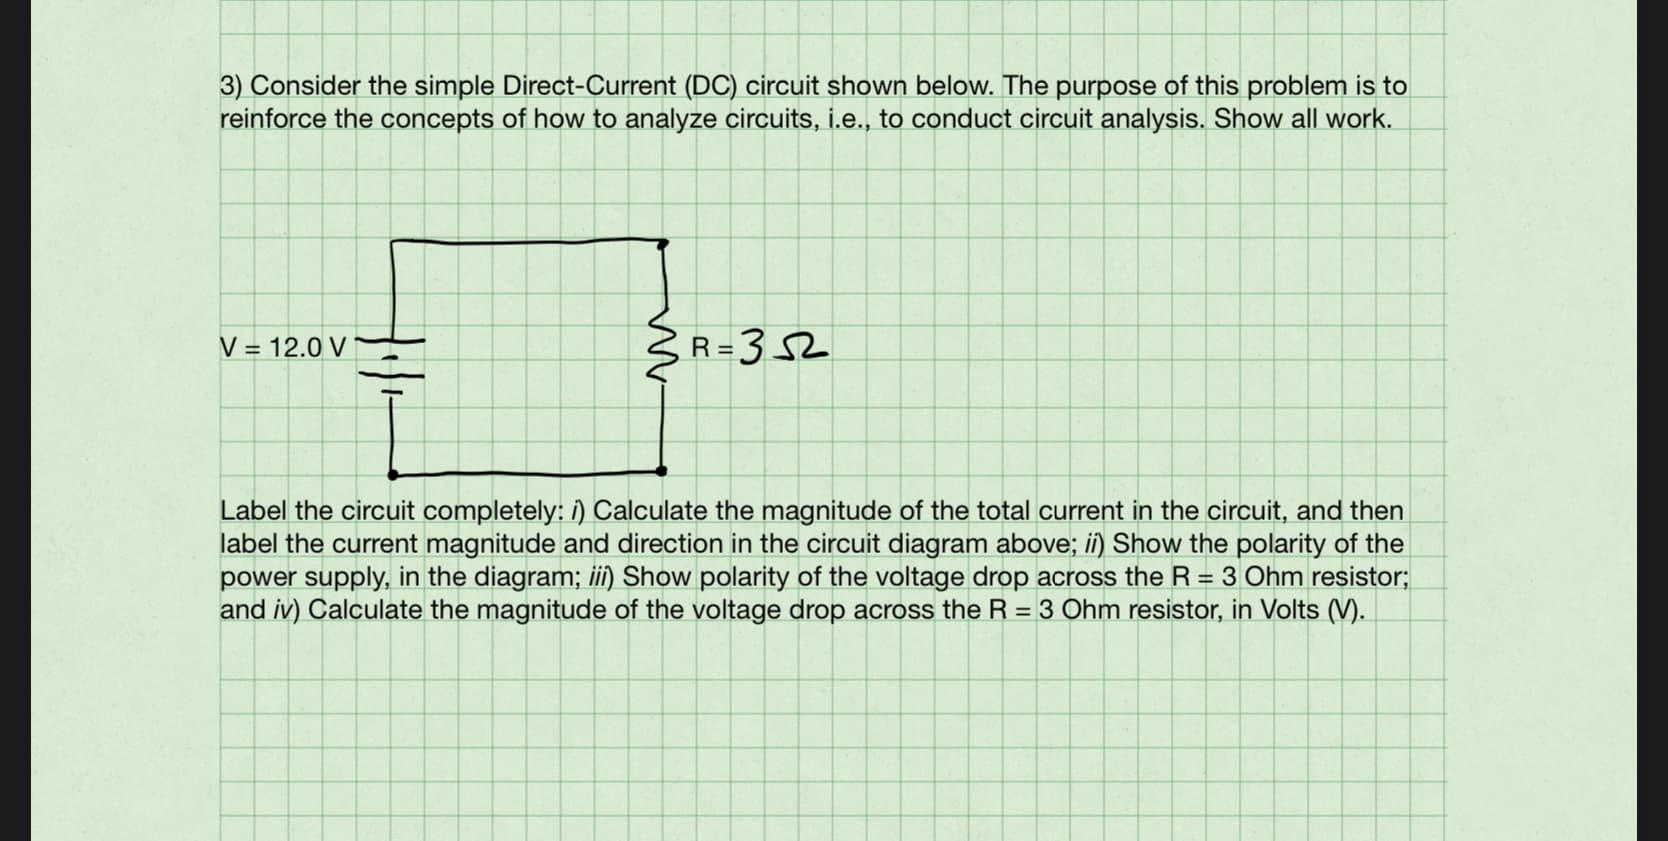 3) Consider the simple Direct-Current (DC) circuit shown below. The purpose of this problem is to
reinforce the concepts of how to analyze circuits, i.e., to conduct circuit analysis. Show all work.
V = 12.0 V
3R=352
Label the circuit completely: i) Calculate the magnitude of the total current in the circuit, and then
label the current magnitude and direction in the circuit diagram above; ii) Show the polarity of the
power supply, in the diagram; ii) Show polarity of the voltage drop across the R = 3 Ohm resistor;
and iv) Calculate the magnitude of the voltage drop across the R = 3 Ohm resistor, in Volts (V).
